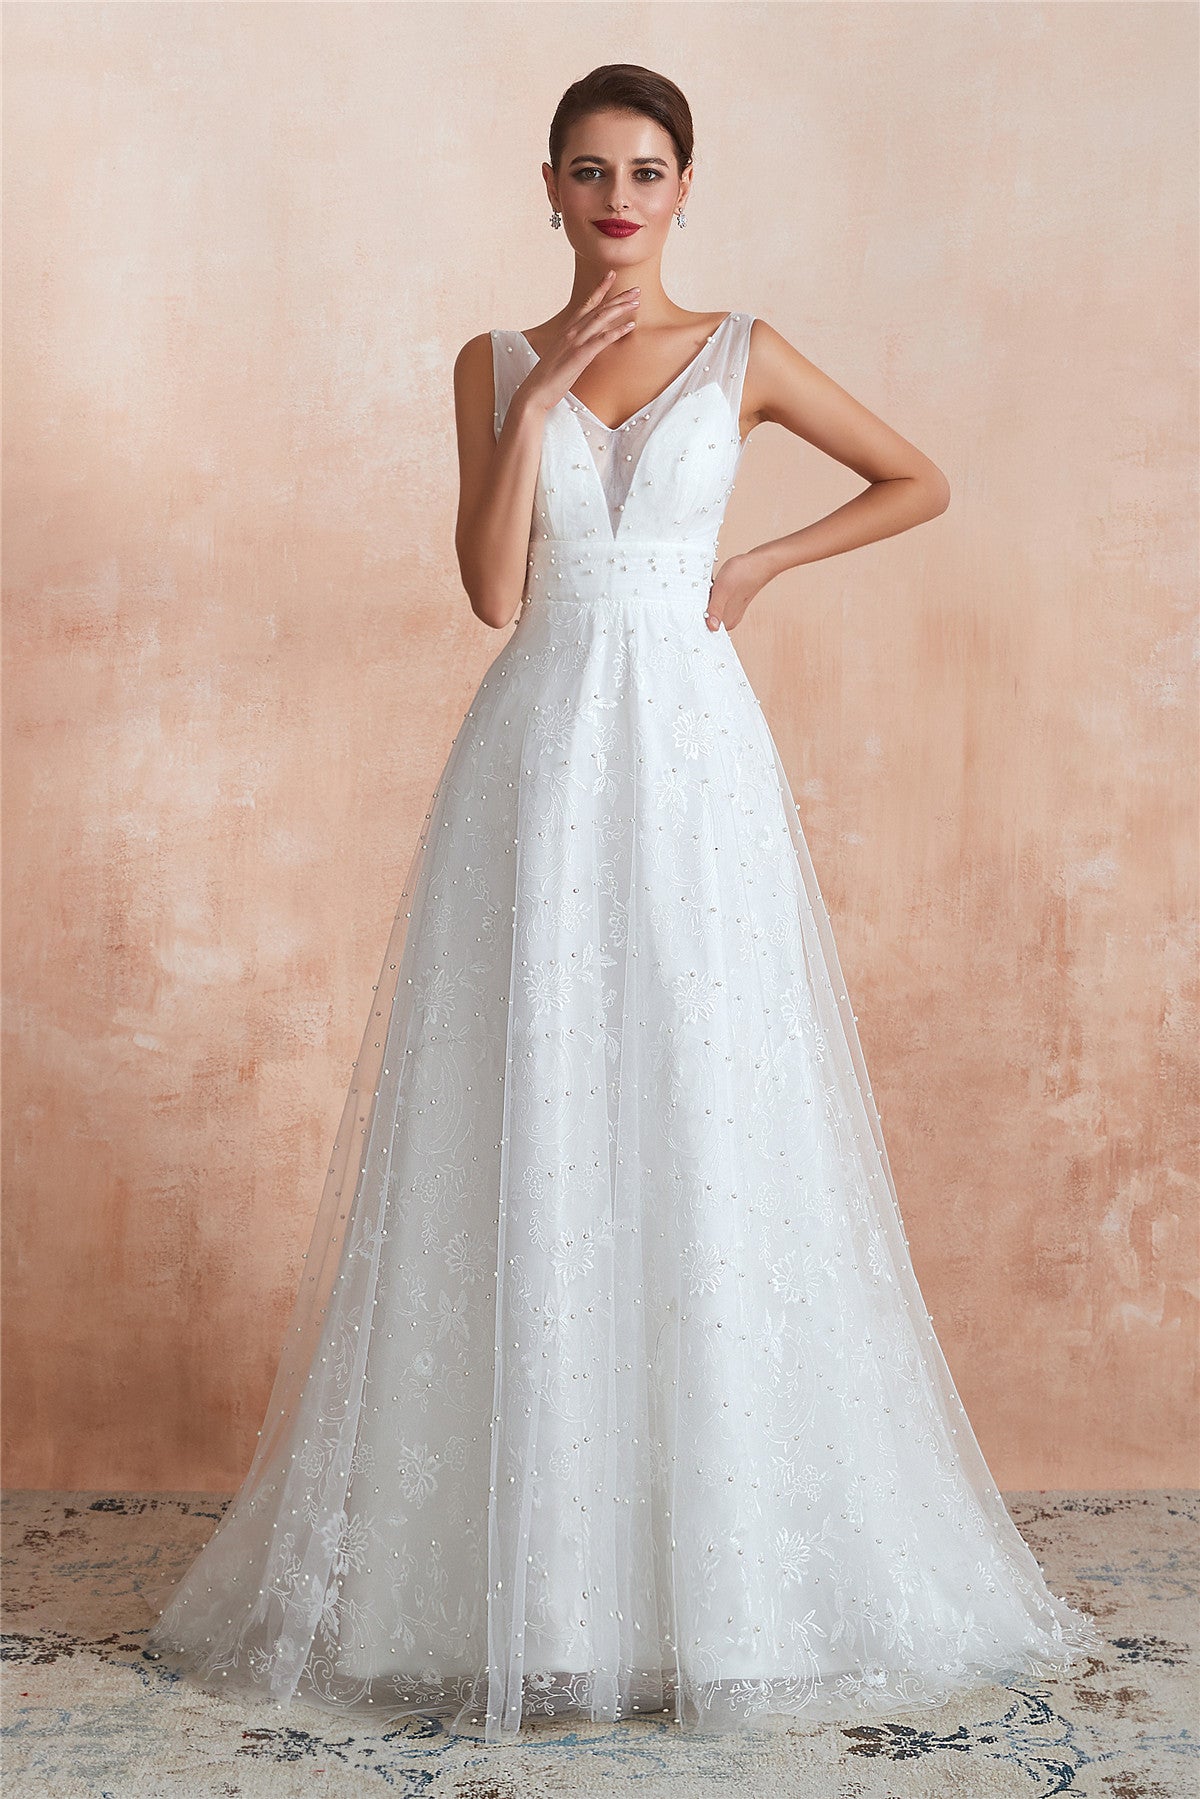 Long A-Line Floral Appliqued White Bridal Dress with Crystals